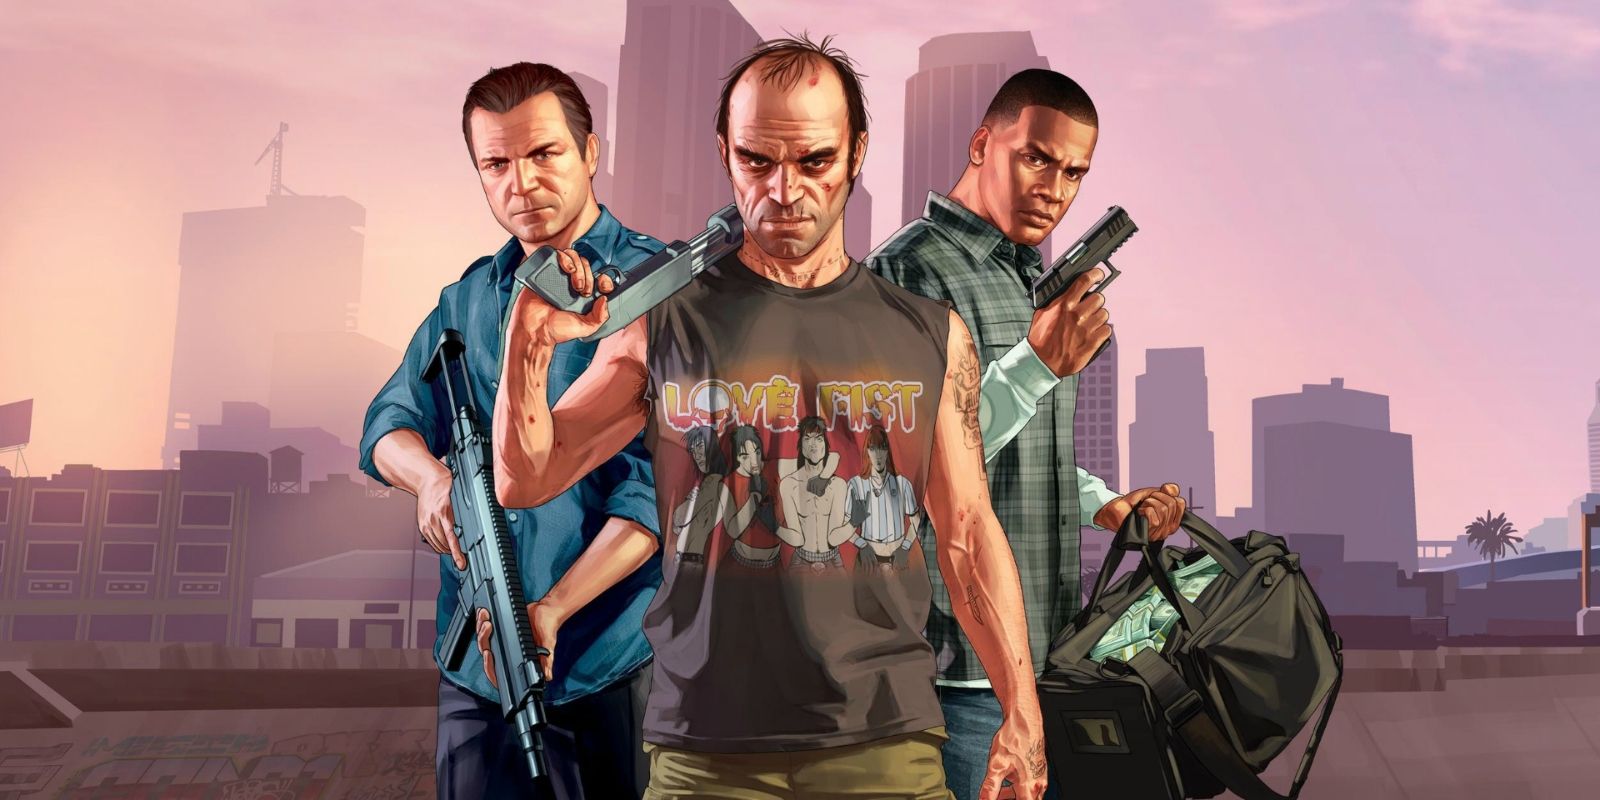 An image of promotional art for Grand Theft Auto 5